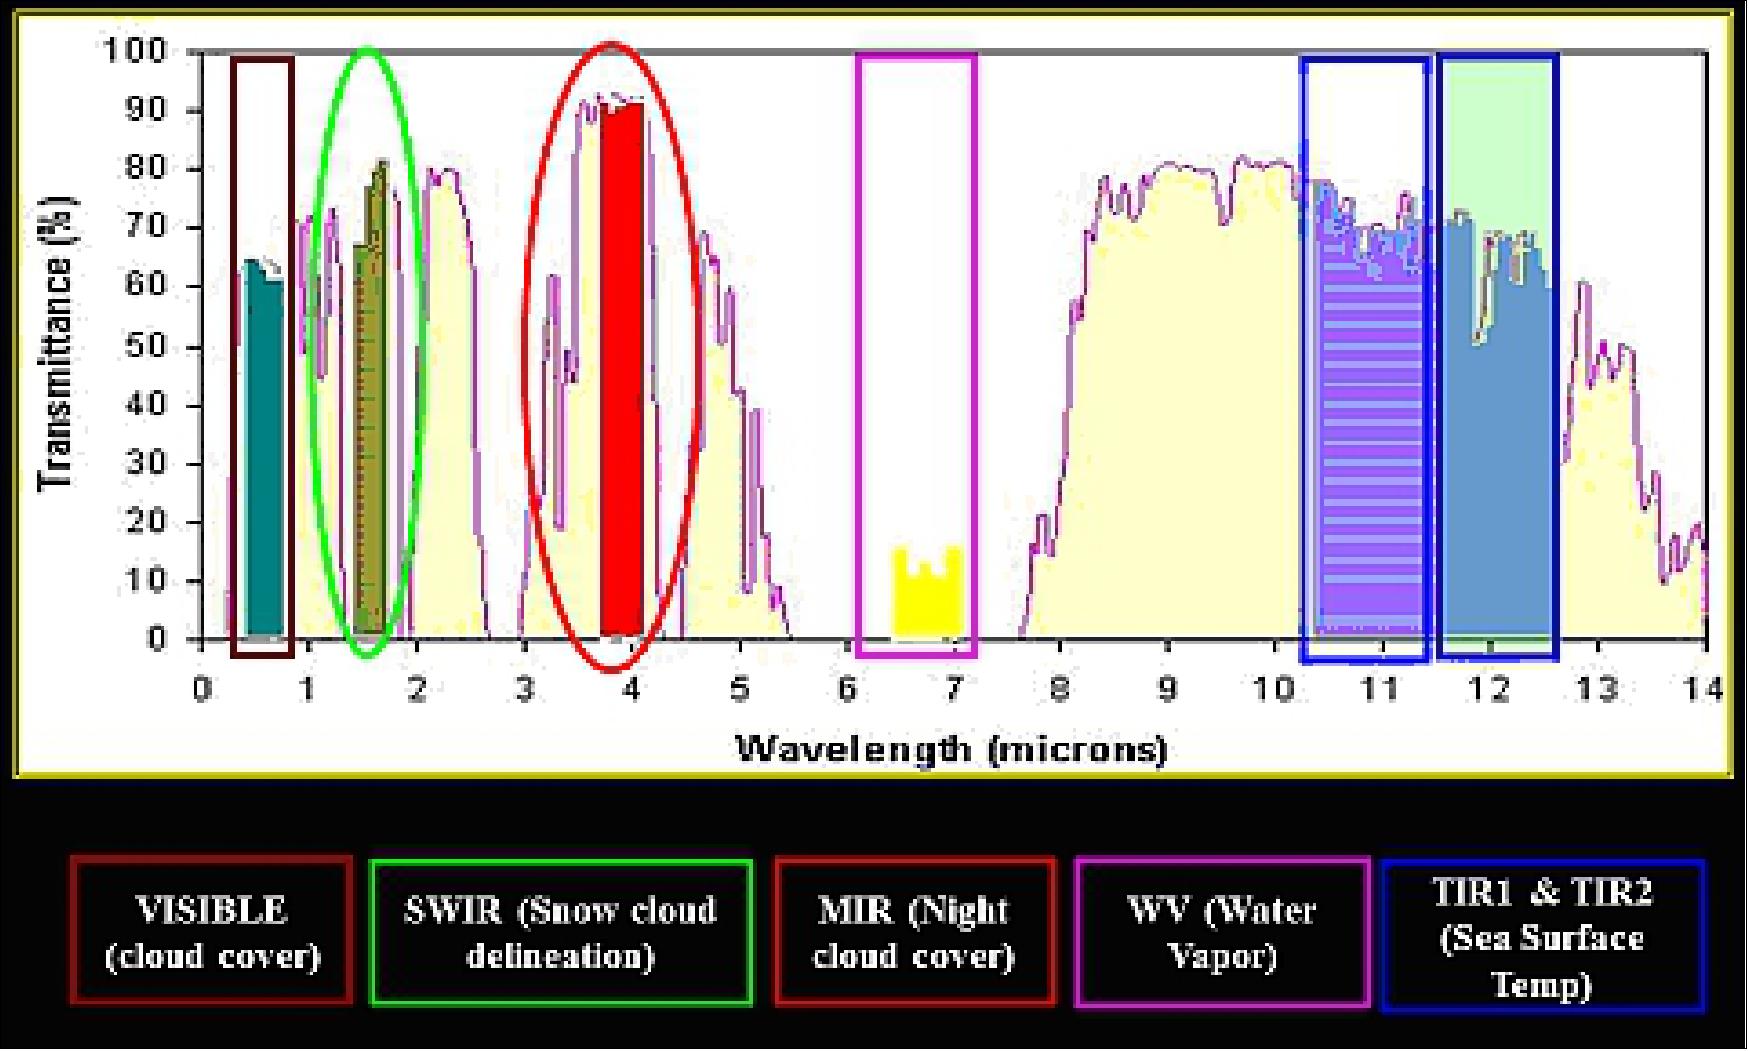 Figure 10: Illustration of the Imager spectral bands and their applications (image credit: ISRO) 11)